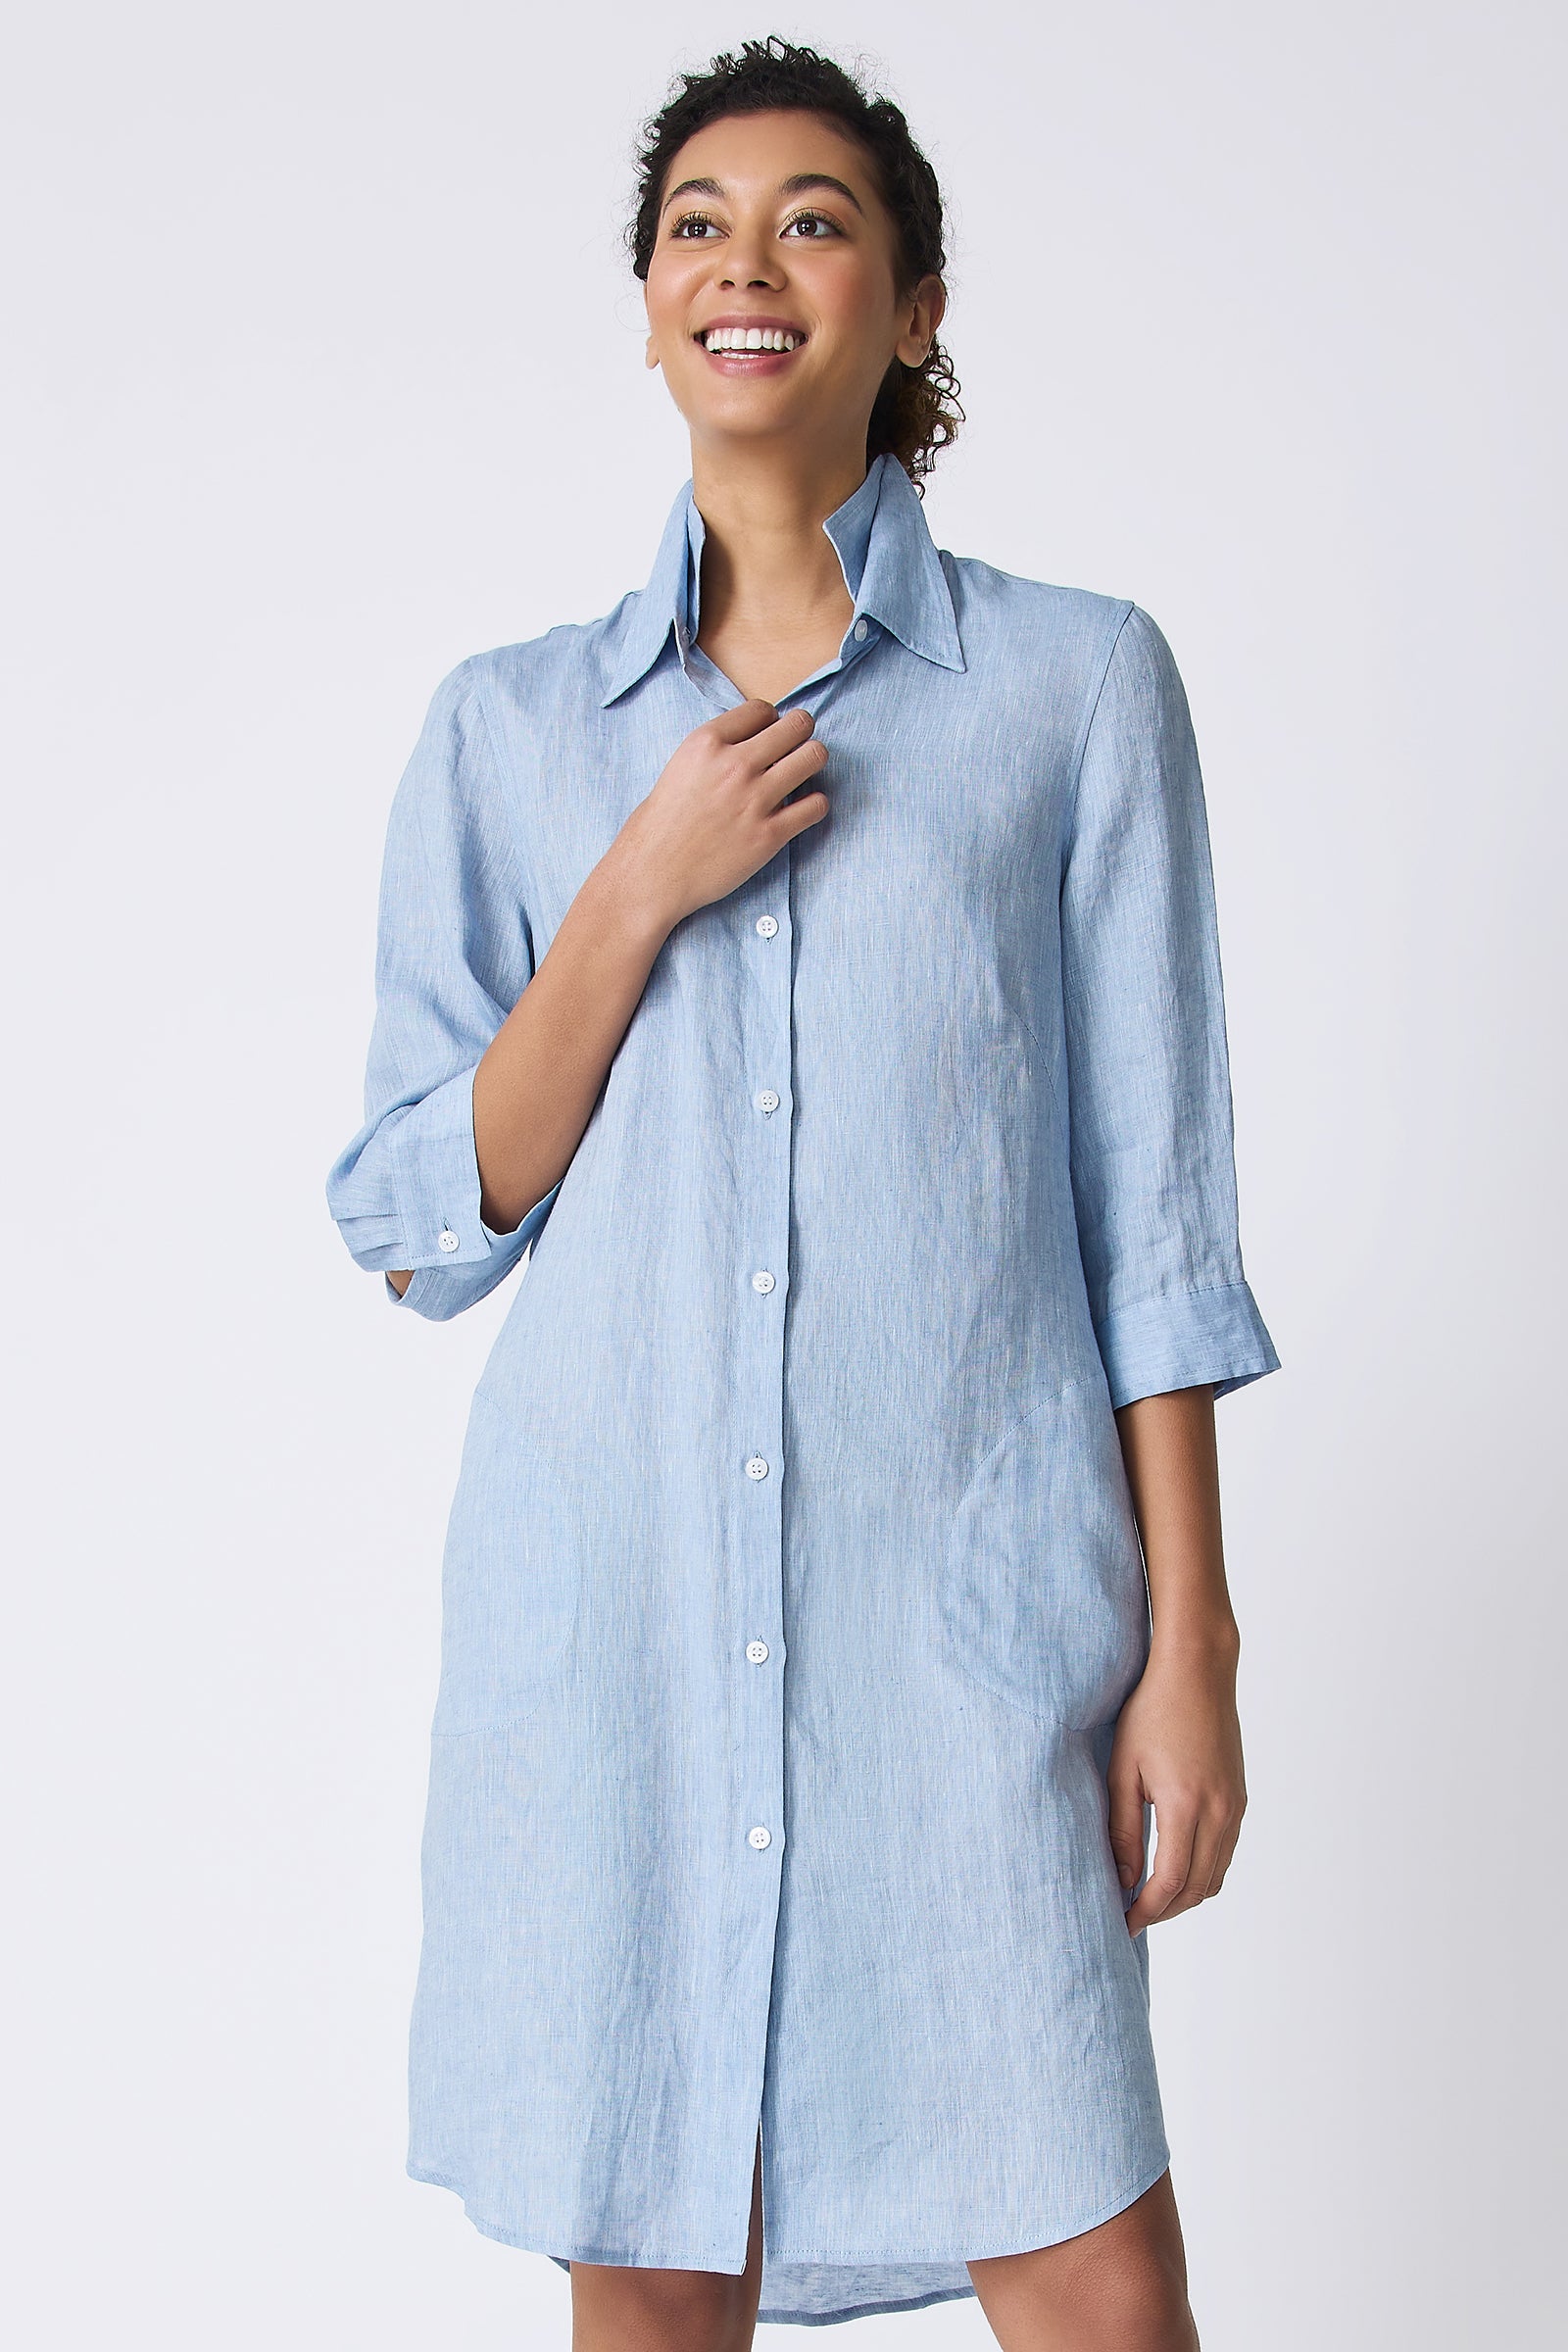 Kal Rieman Katie Shirt Dress in Sky Blue on model smiling front view